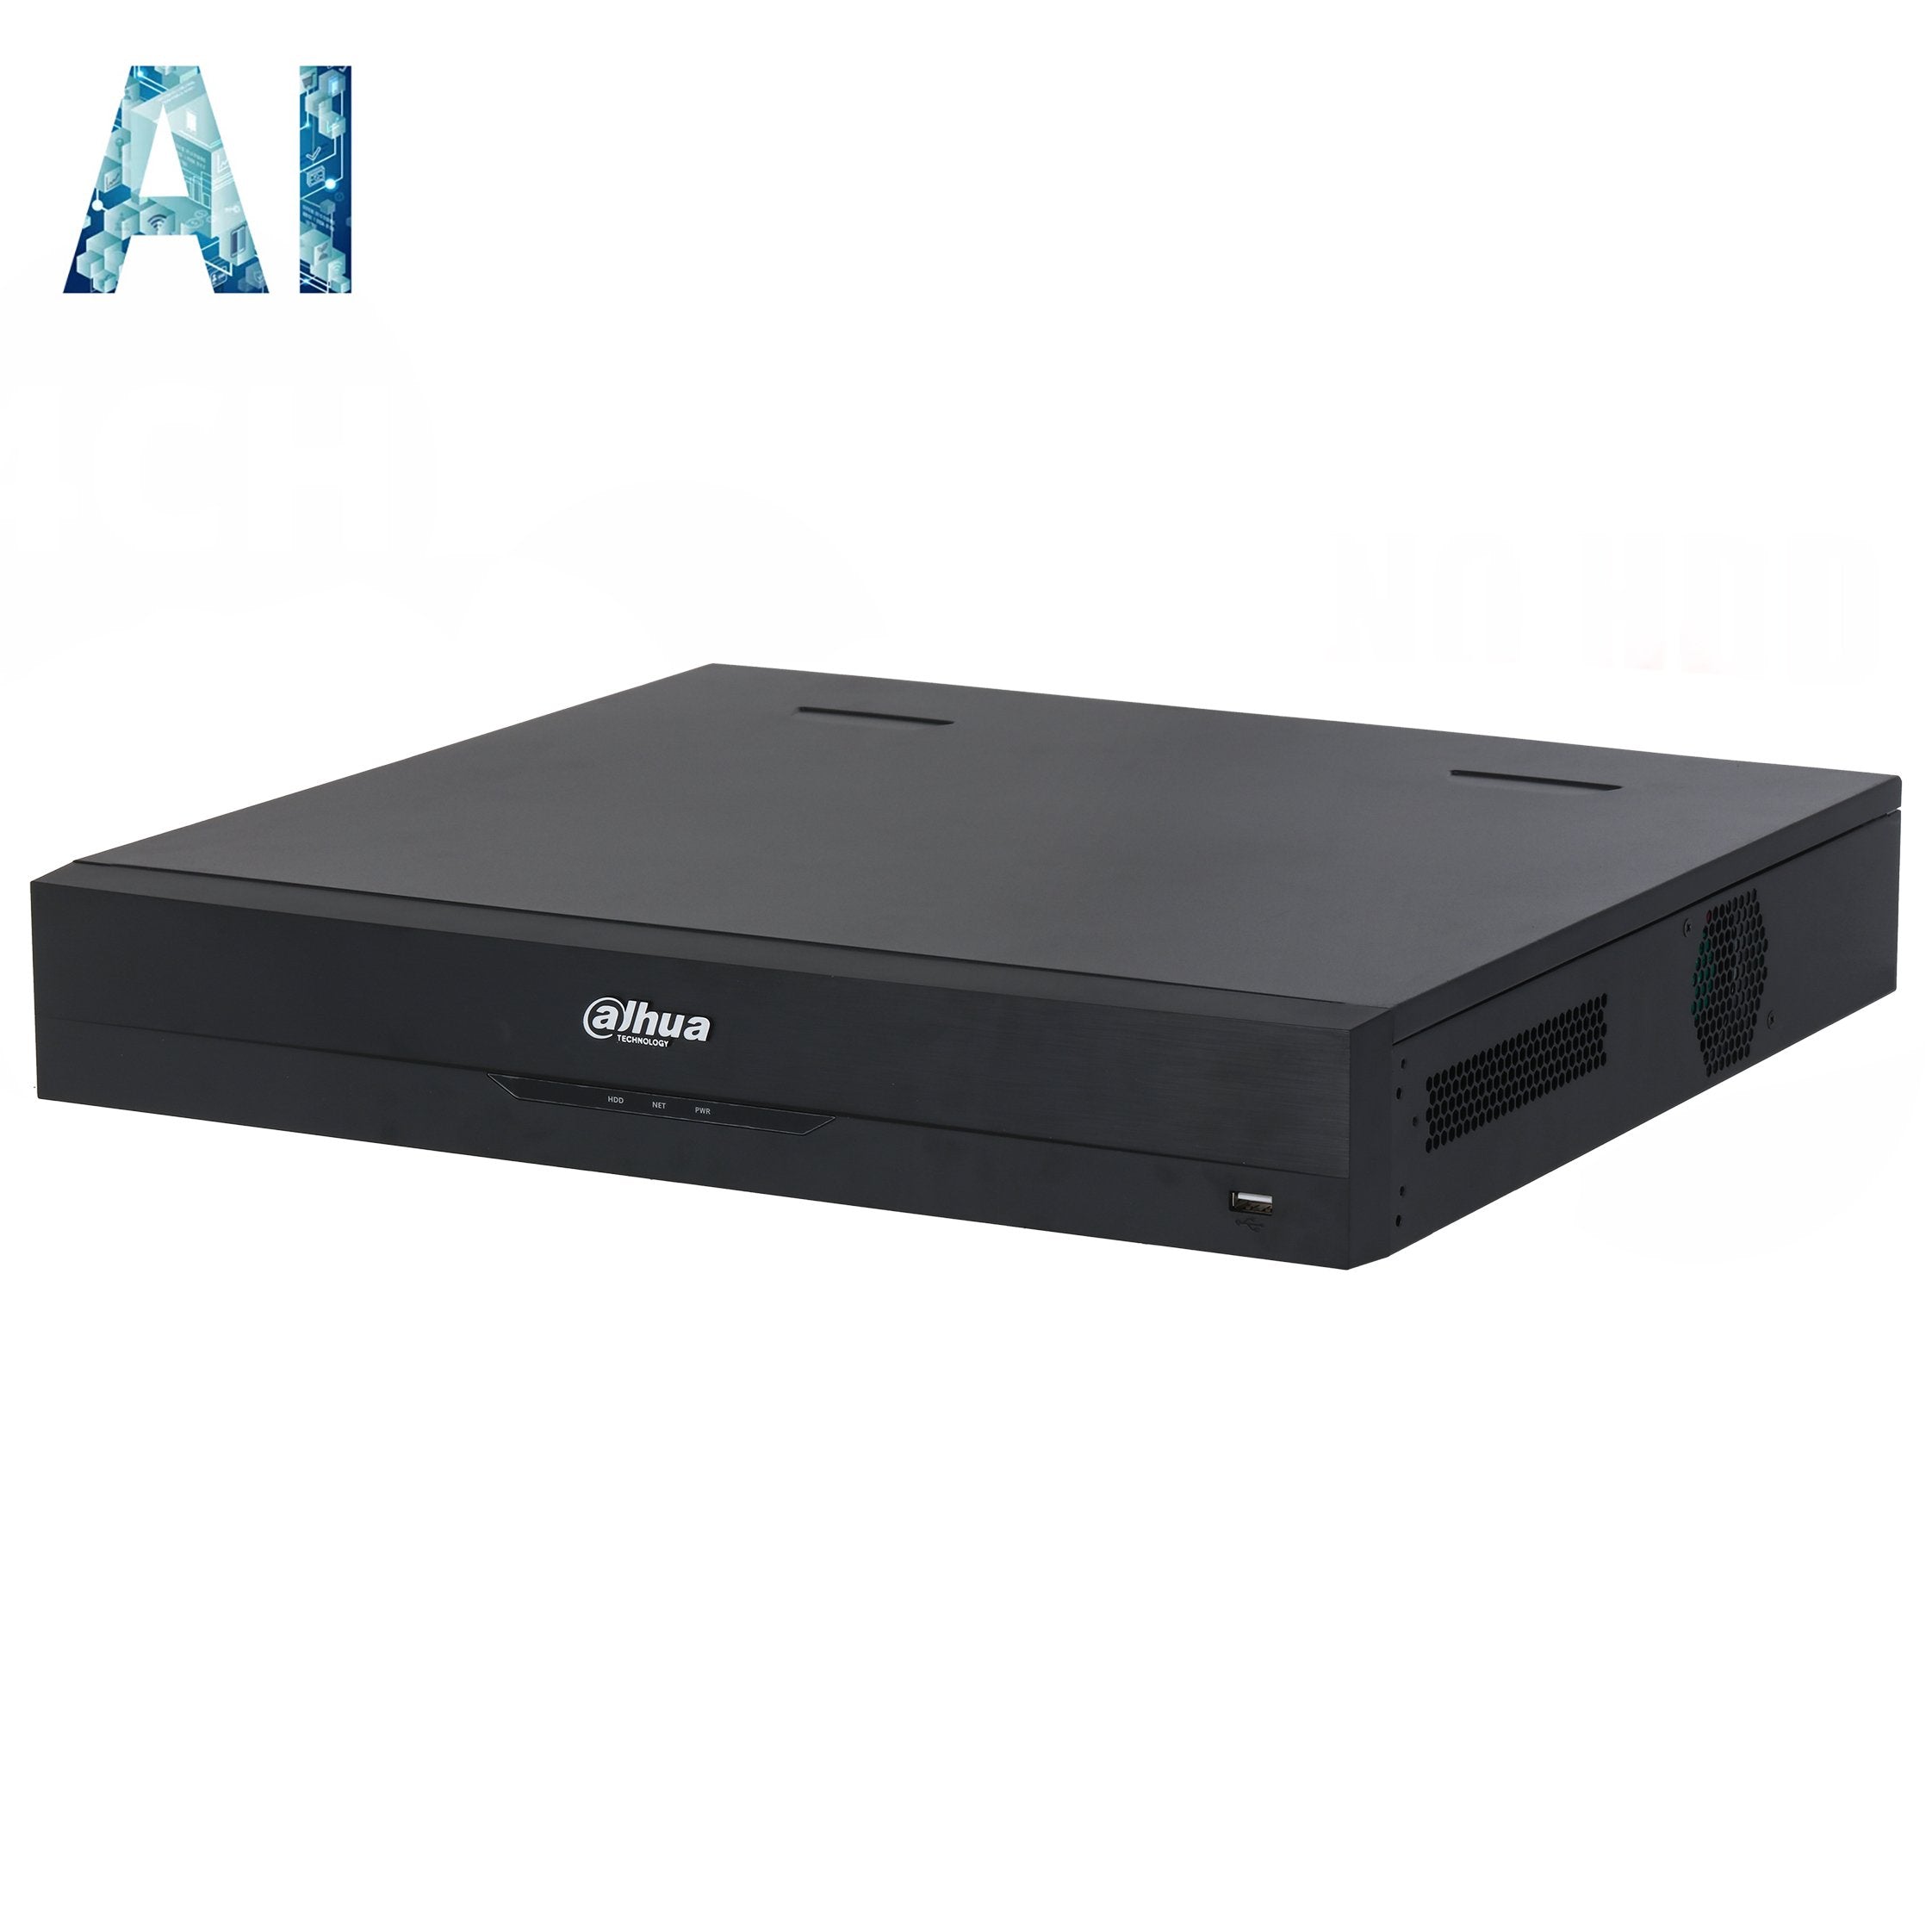 Dahua 32 Channel NVR, WizSense AI Series, 16 x POE (8 x EPOE), 1.5RU, 384MB (200MB With AI Function Enabled), 1 x Gigabit NIC, 4 x HDD **NO HDD INSTALLED**